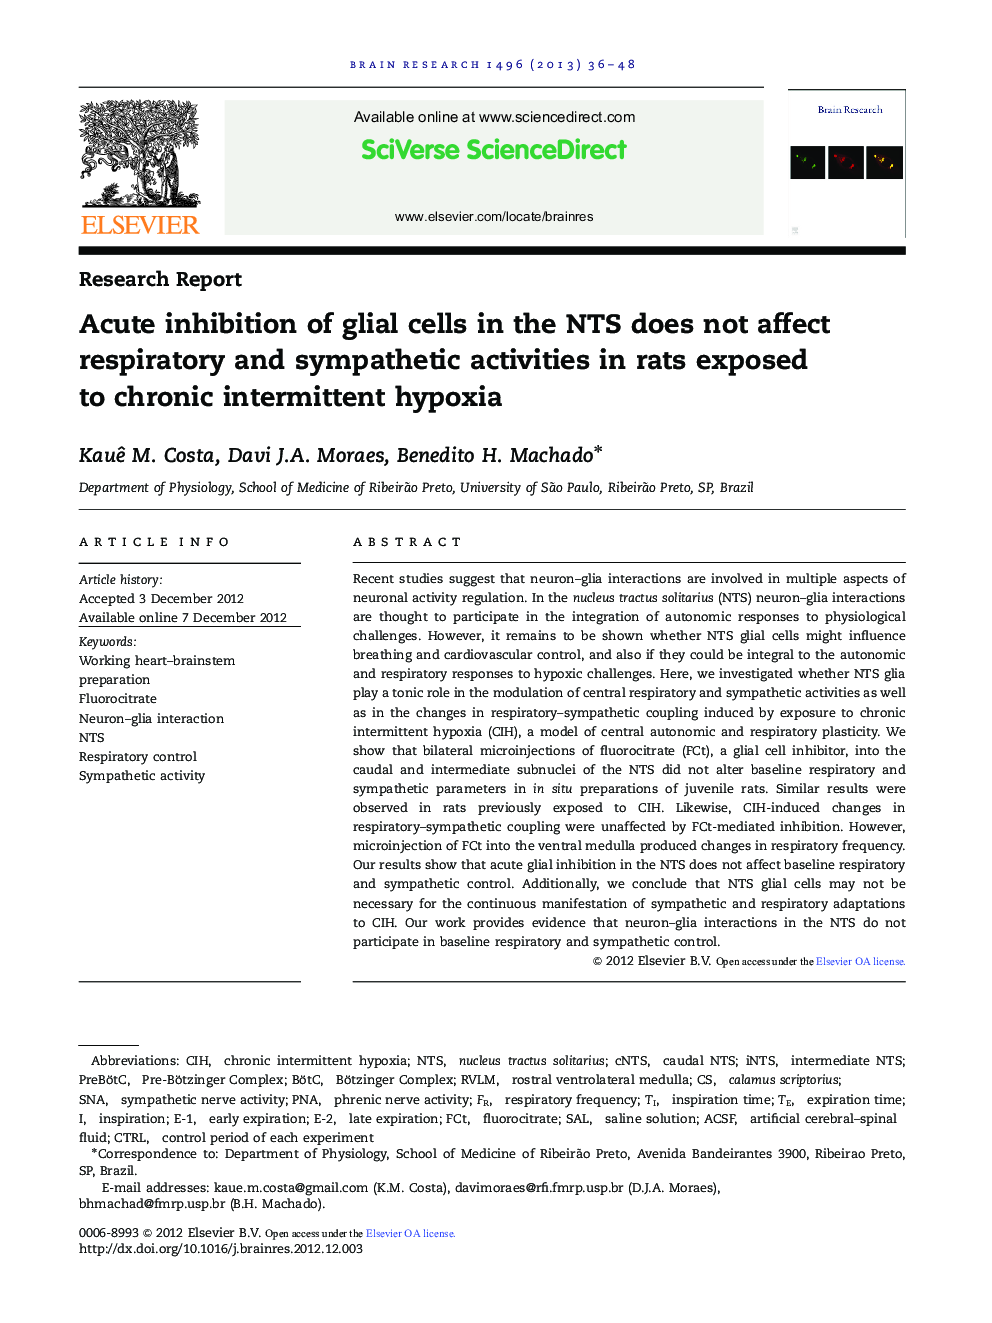 Research ReportAcute inhibition of glial cells in the NTS does not affect respiratory and sympathetic activities in rats exposed to chronic intermittent hypoxia